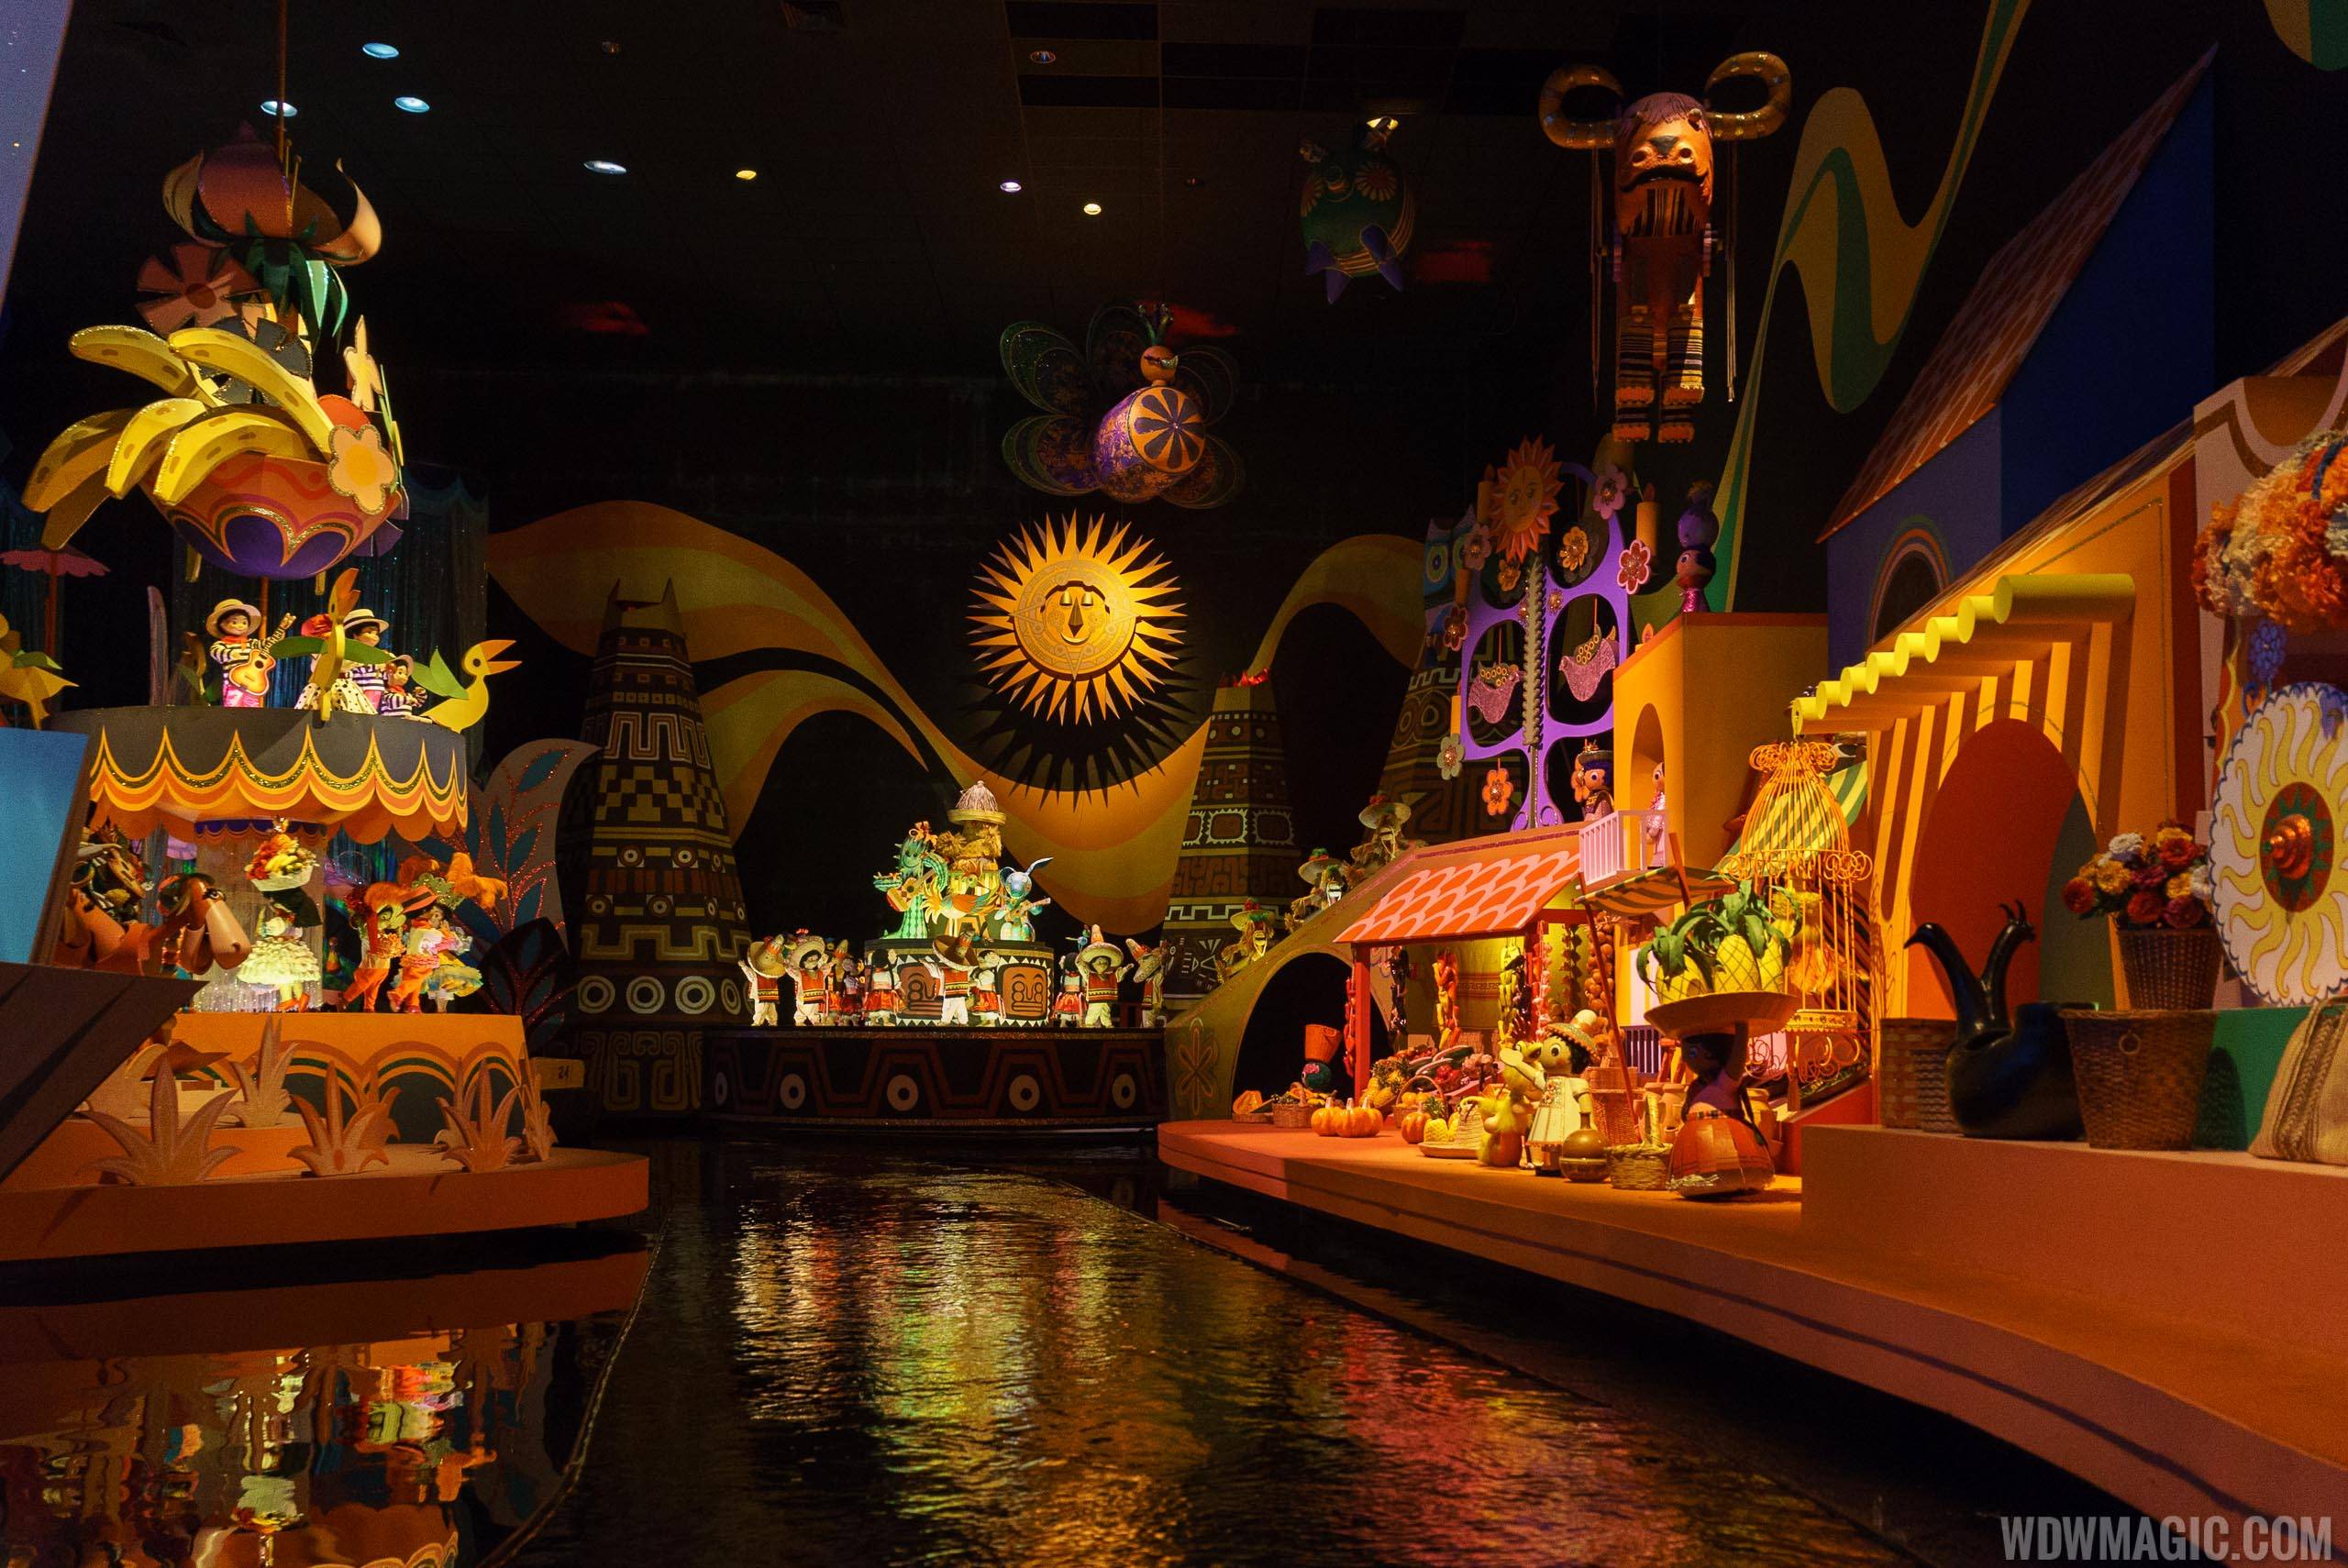 It's A Small World closing for lengthy refurbishment in August